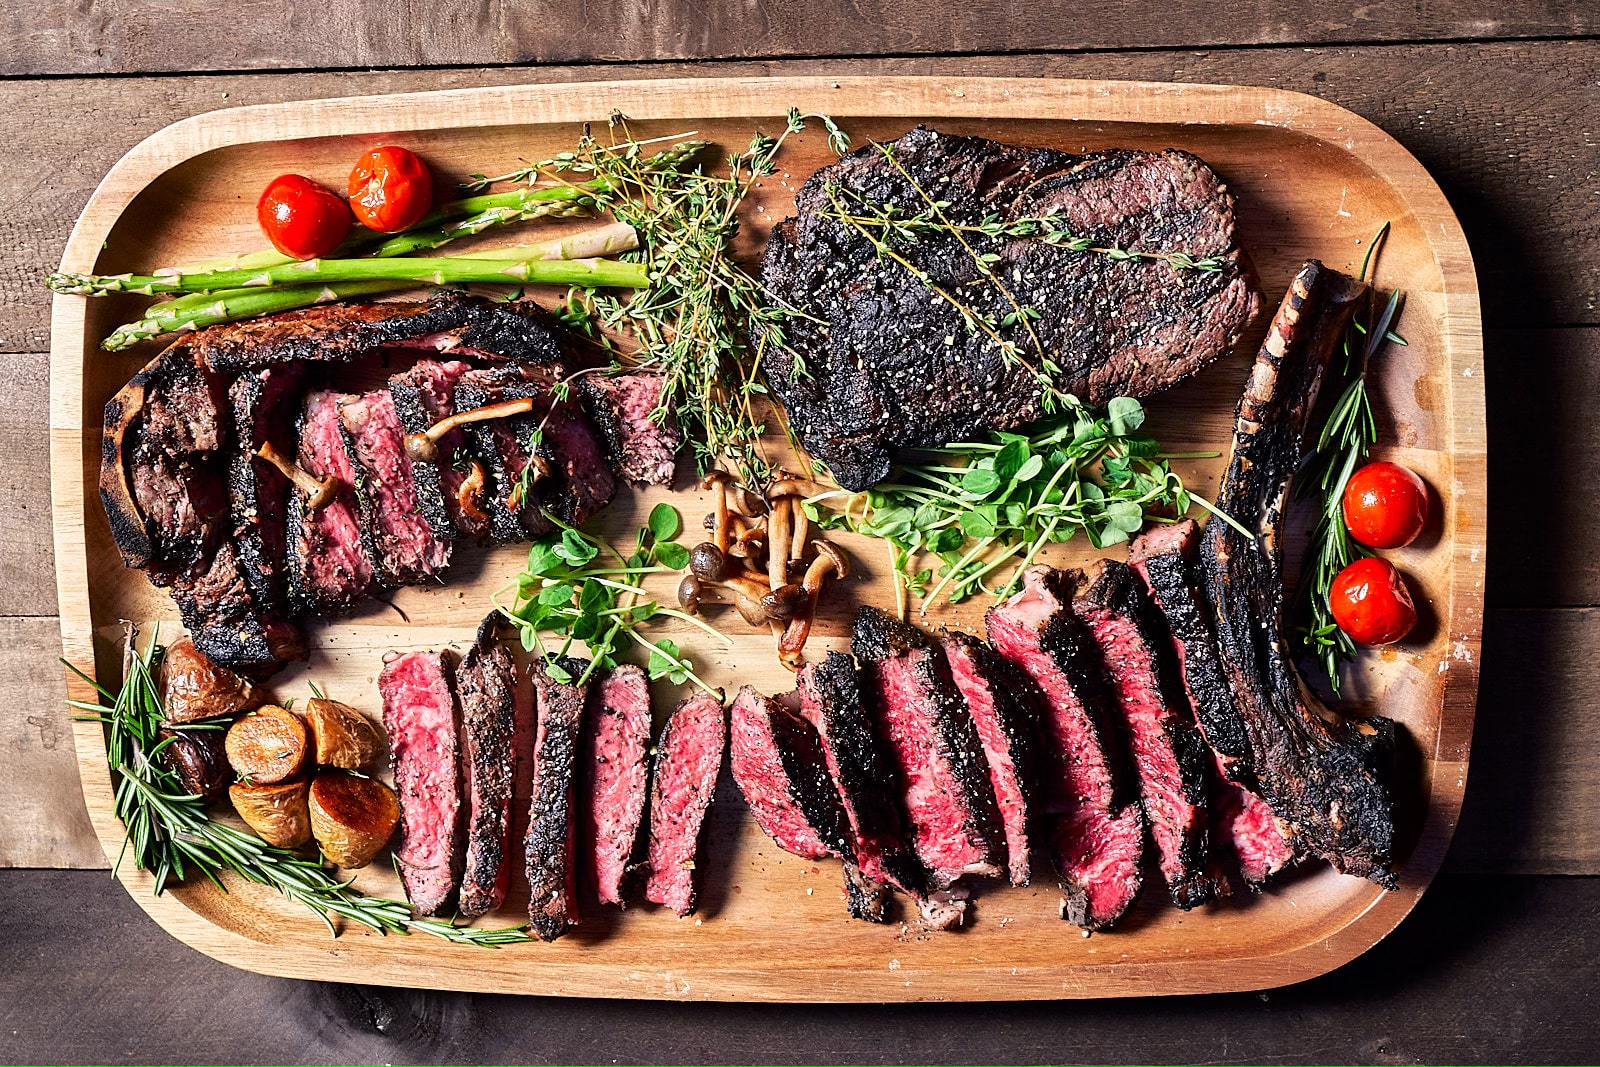 Assortment of steaks beautifully cooked, cut and plated with garnishes and aromatics around them